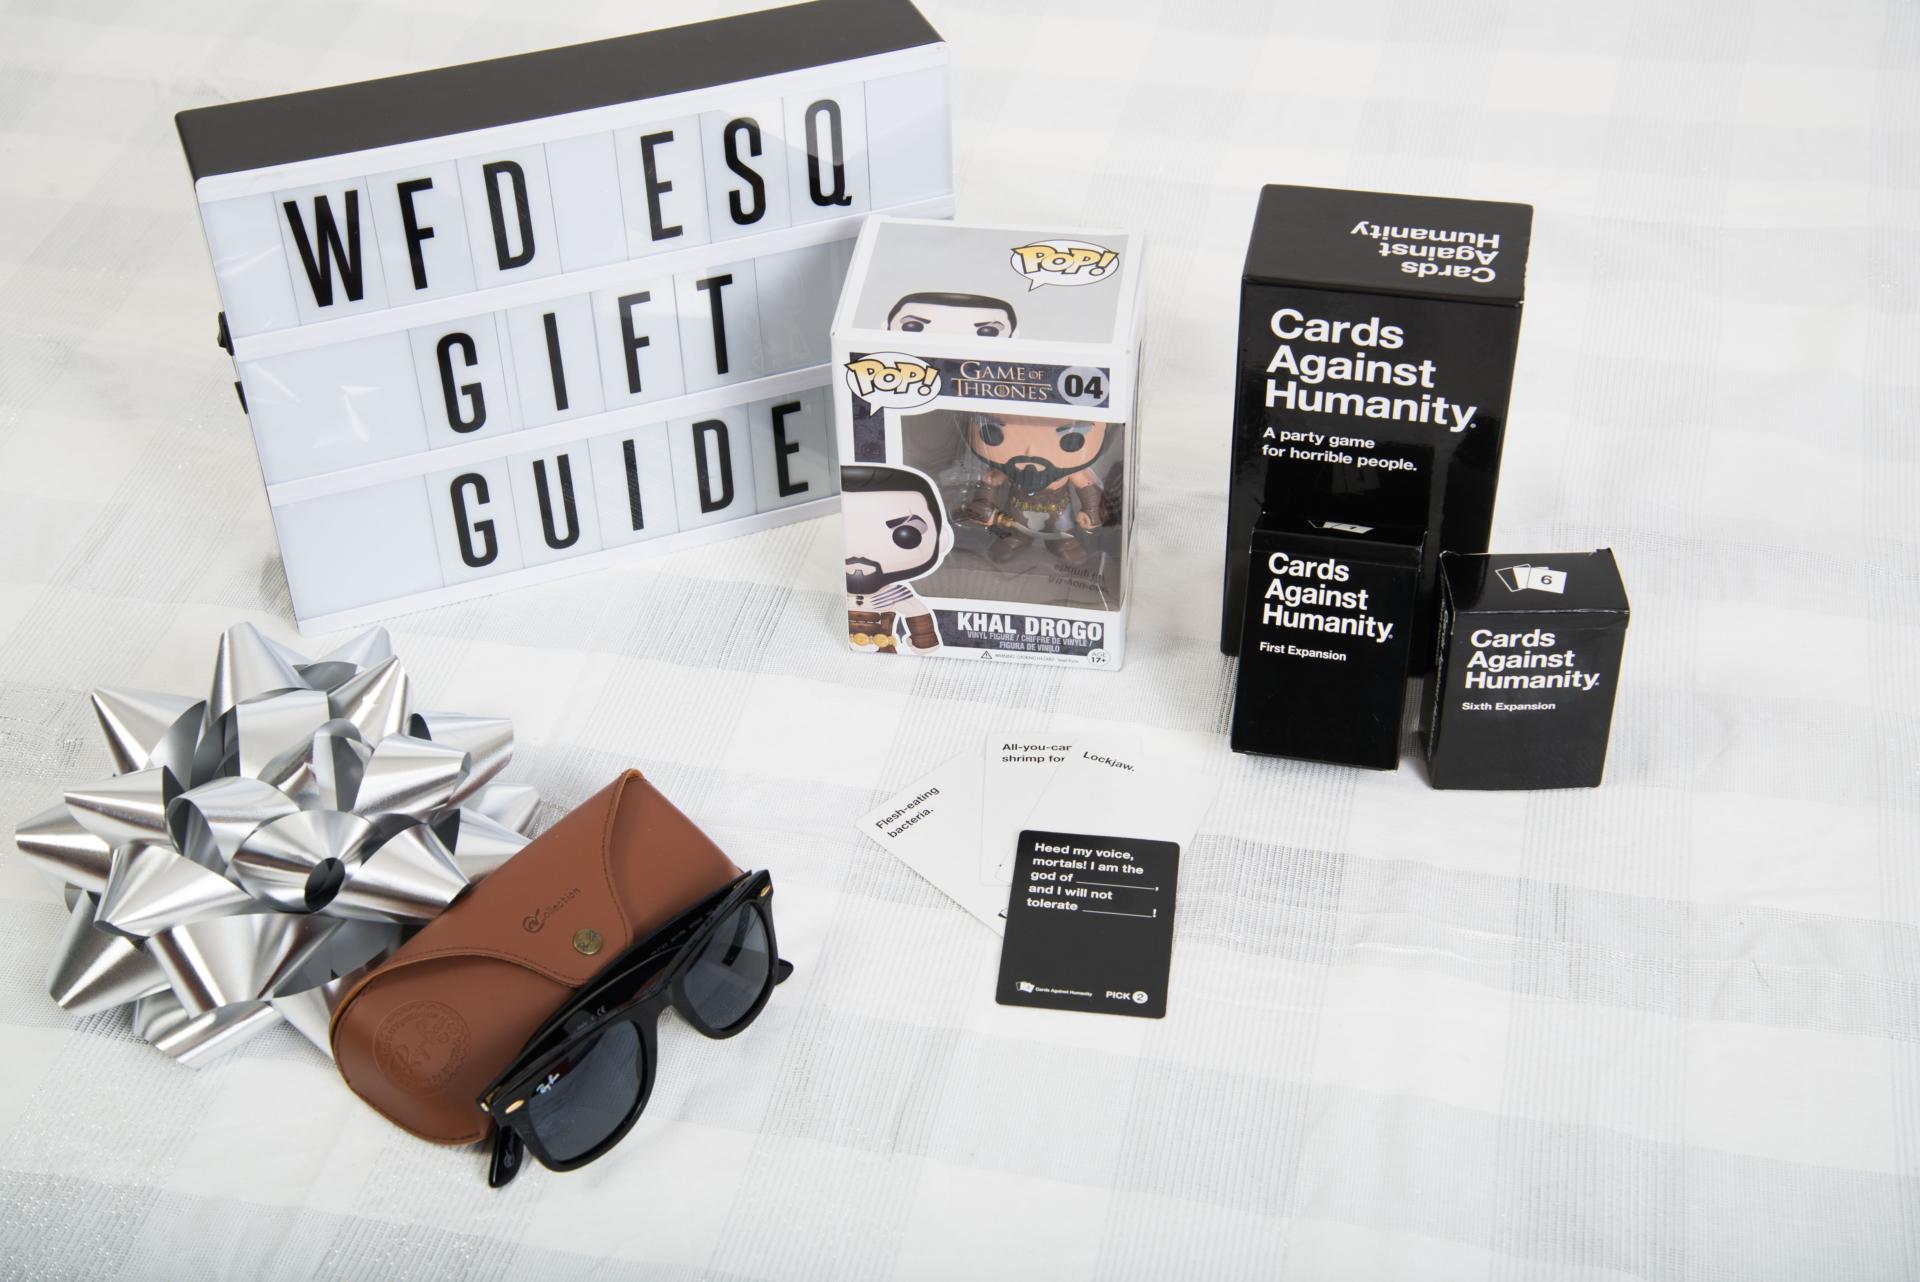 CELEBRATE: Gift Guide for Him